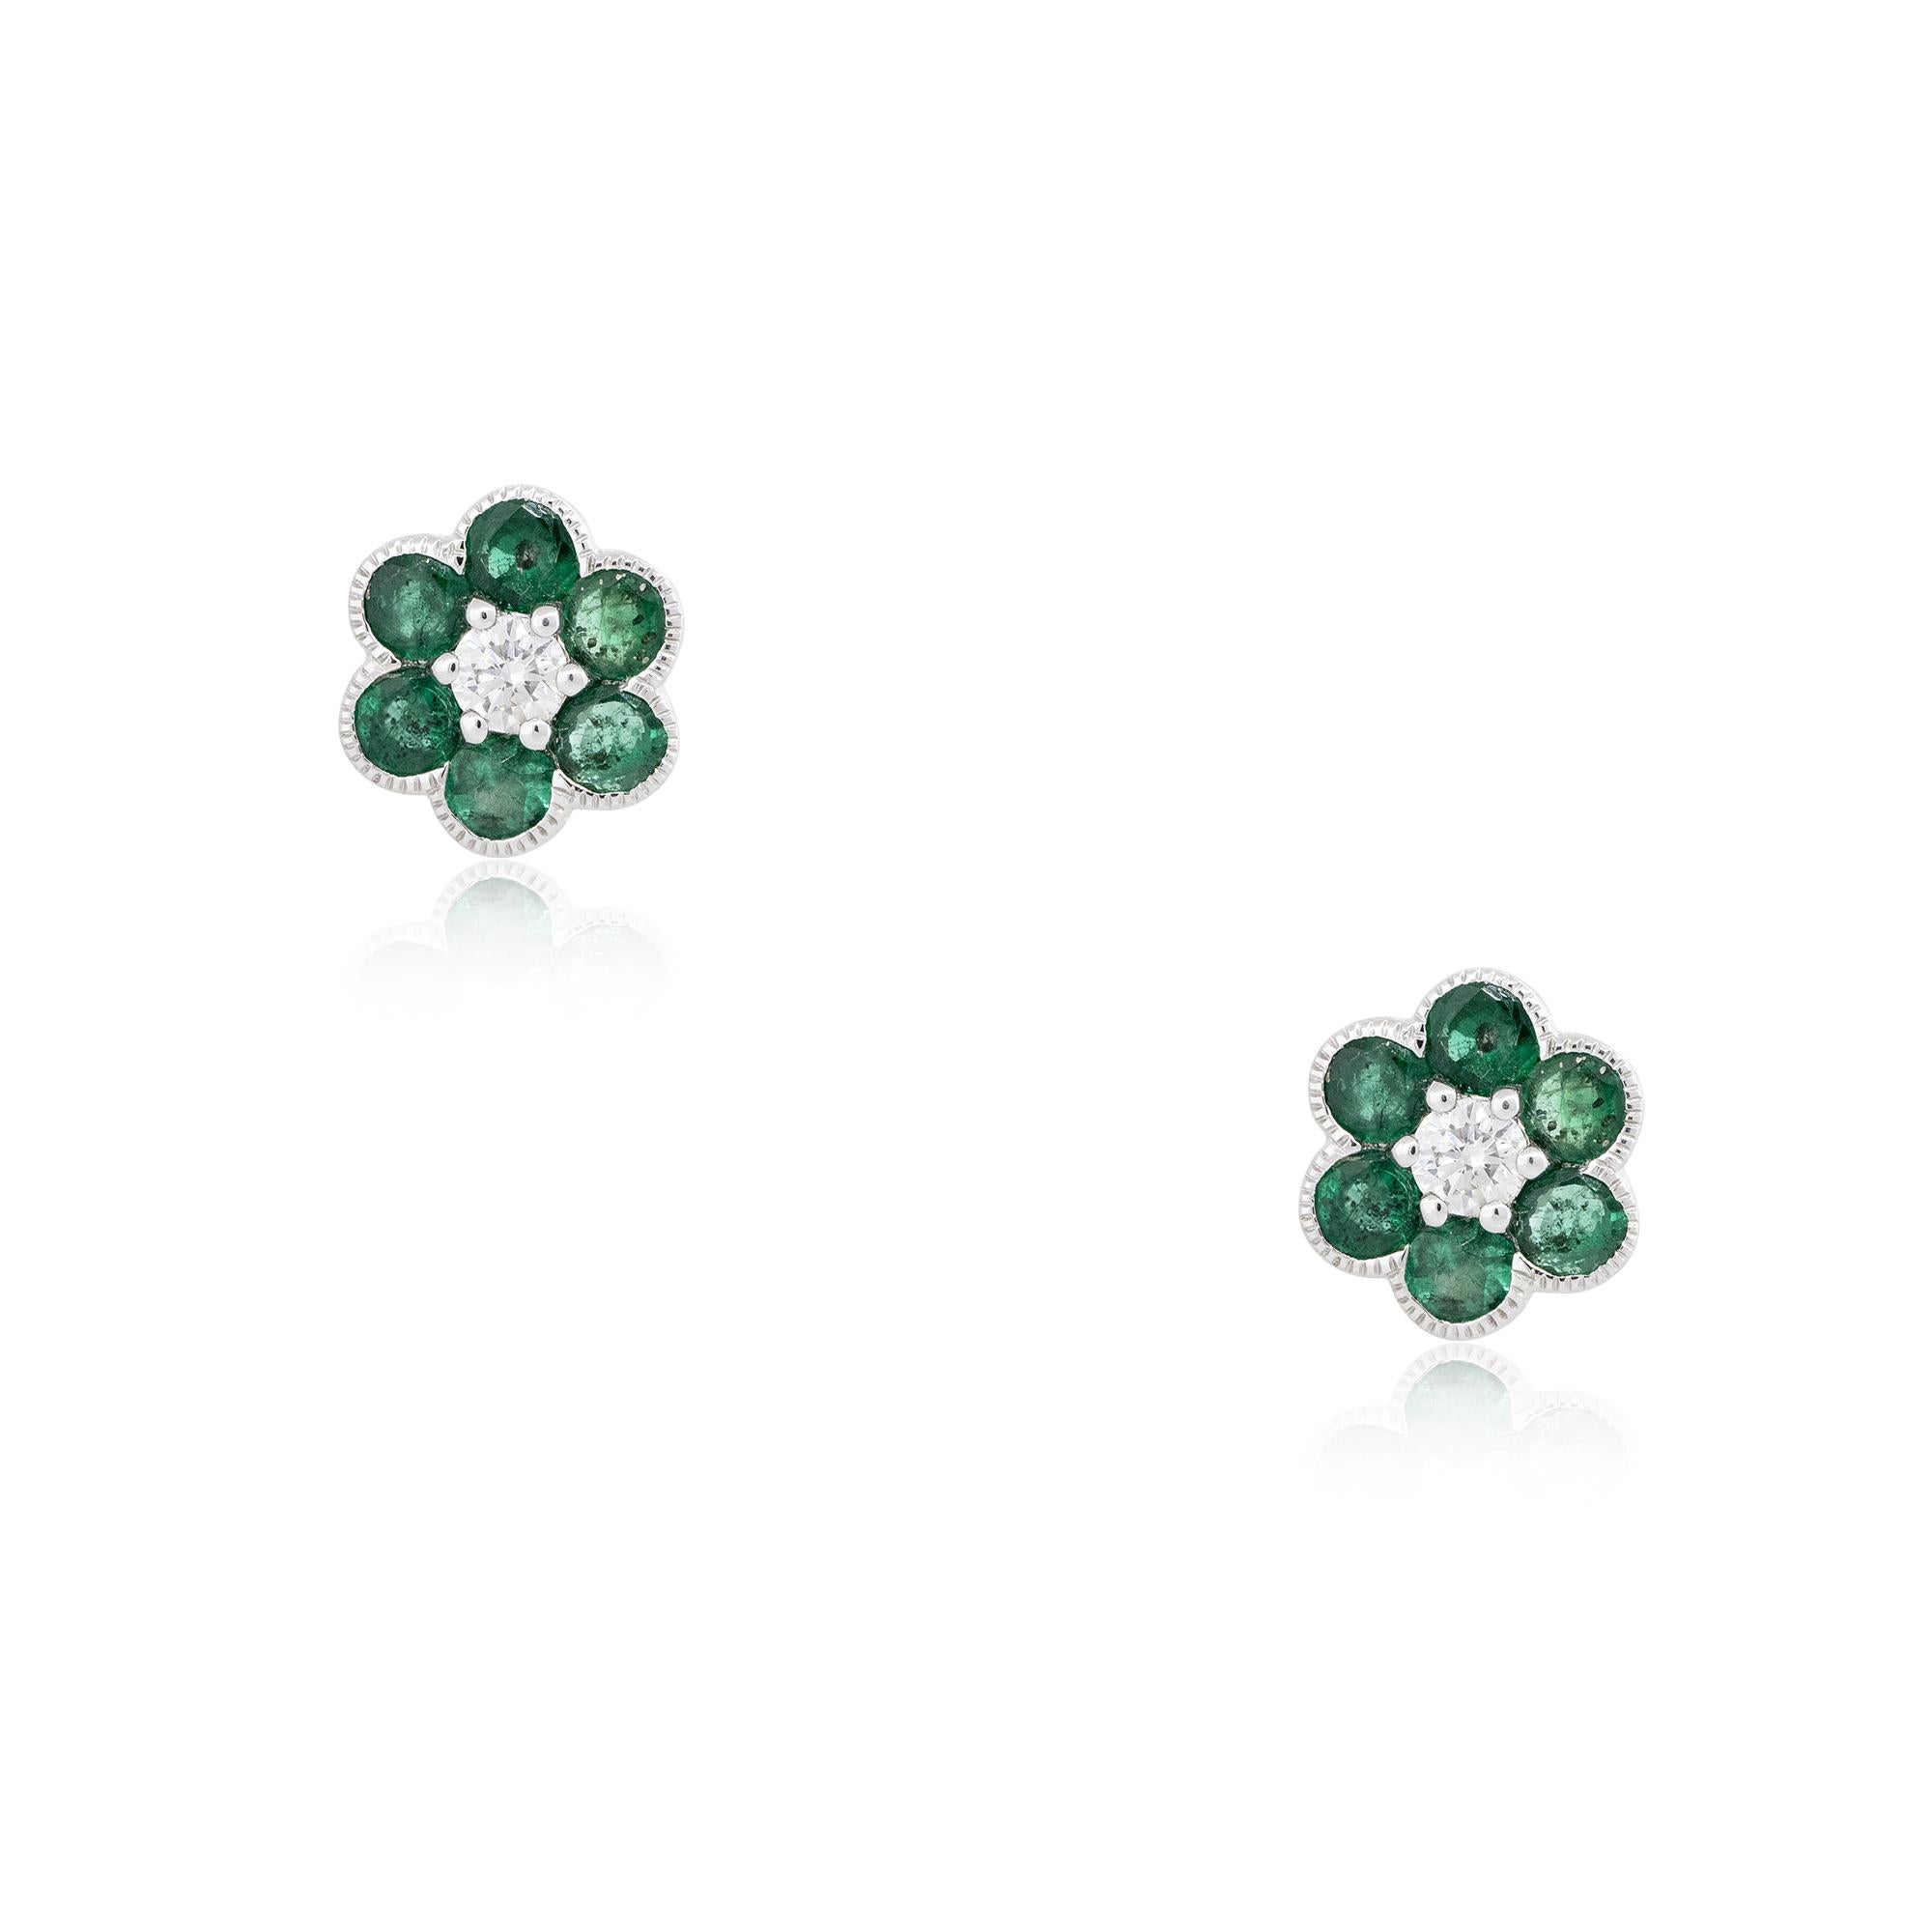 18k White Gold 1.49ct Emerald & Diamond Flower Earrings

Product: Emerald & Diamond Flower Earrings
Material: 18k White Gold
Gemstone/ Diamond Details: There are approximately 1.49 carats of Emerald Gemstones (12 Emeralds), and approximately 0.23